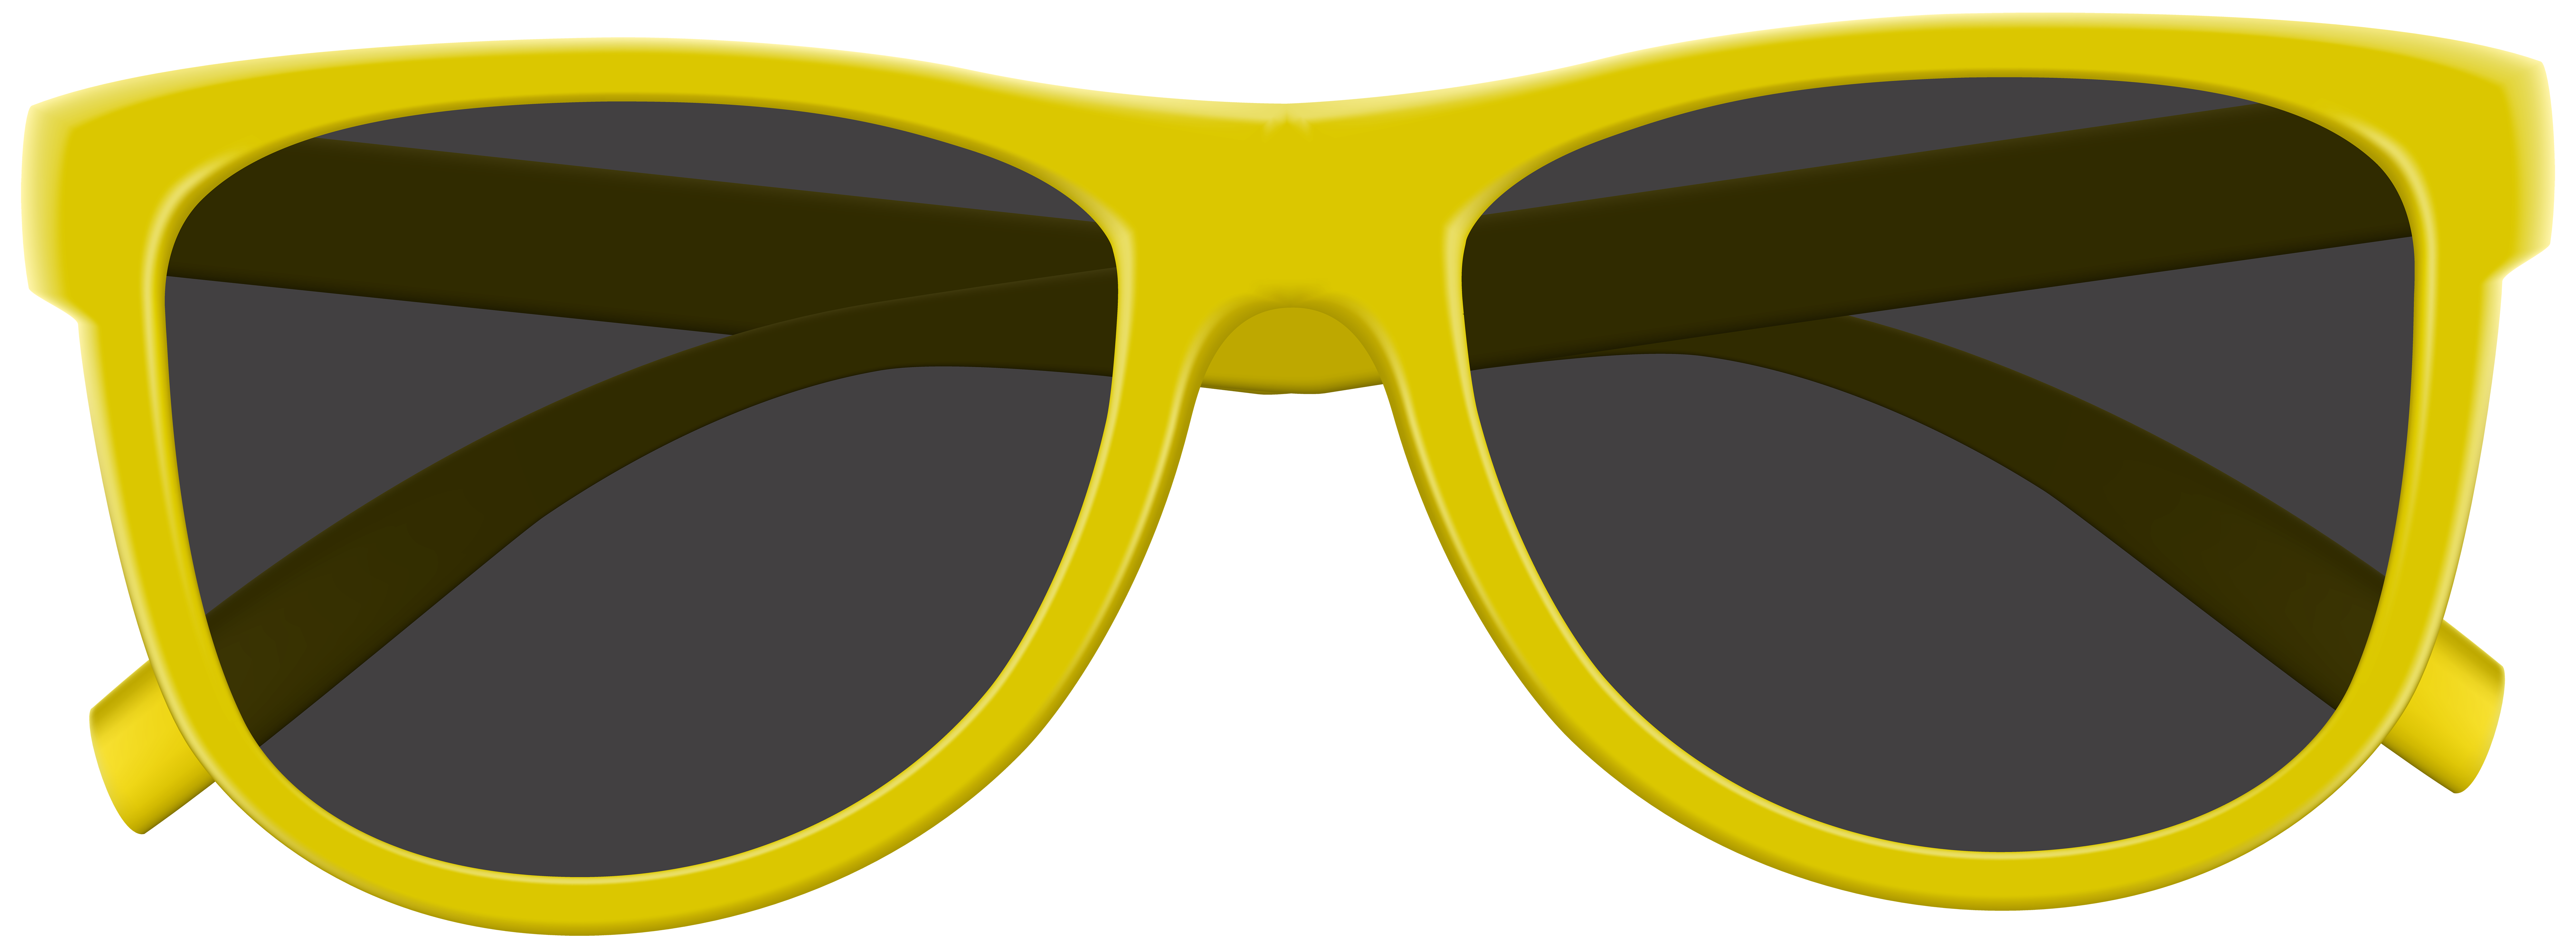 Brand Goggles Sunglasses Yellow PNG Image High Quality Clipart